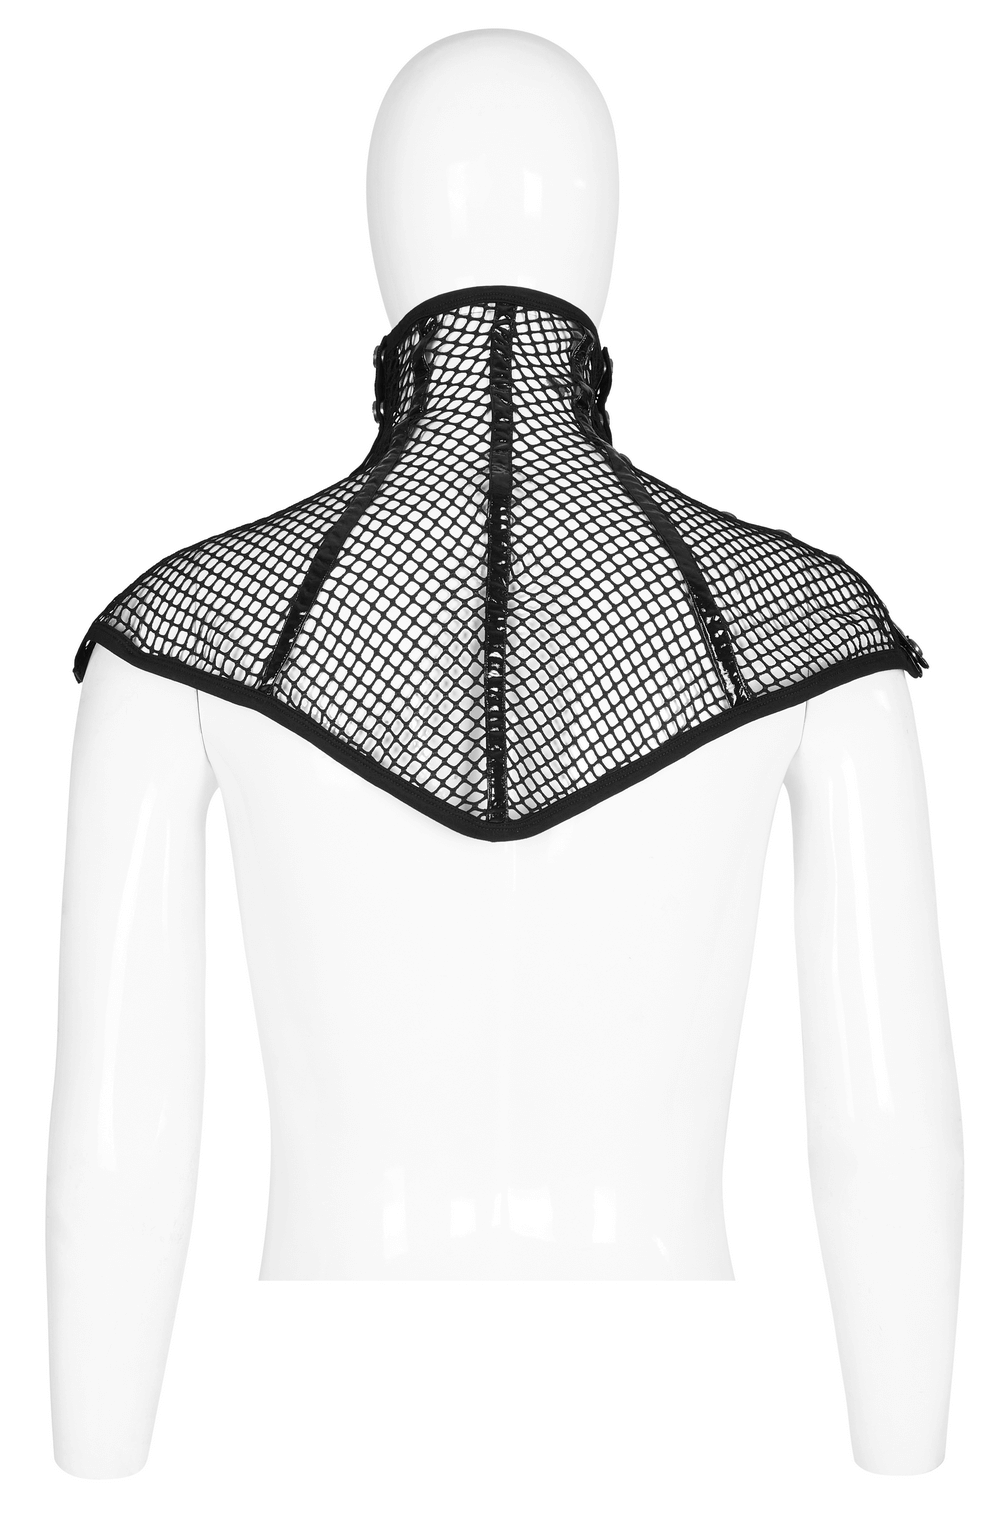 Chic Black Mesh Statement Mask Collar with Shoulder Pads